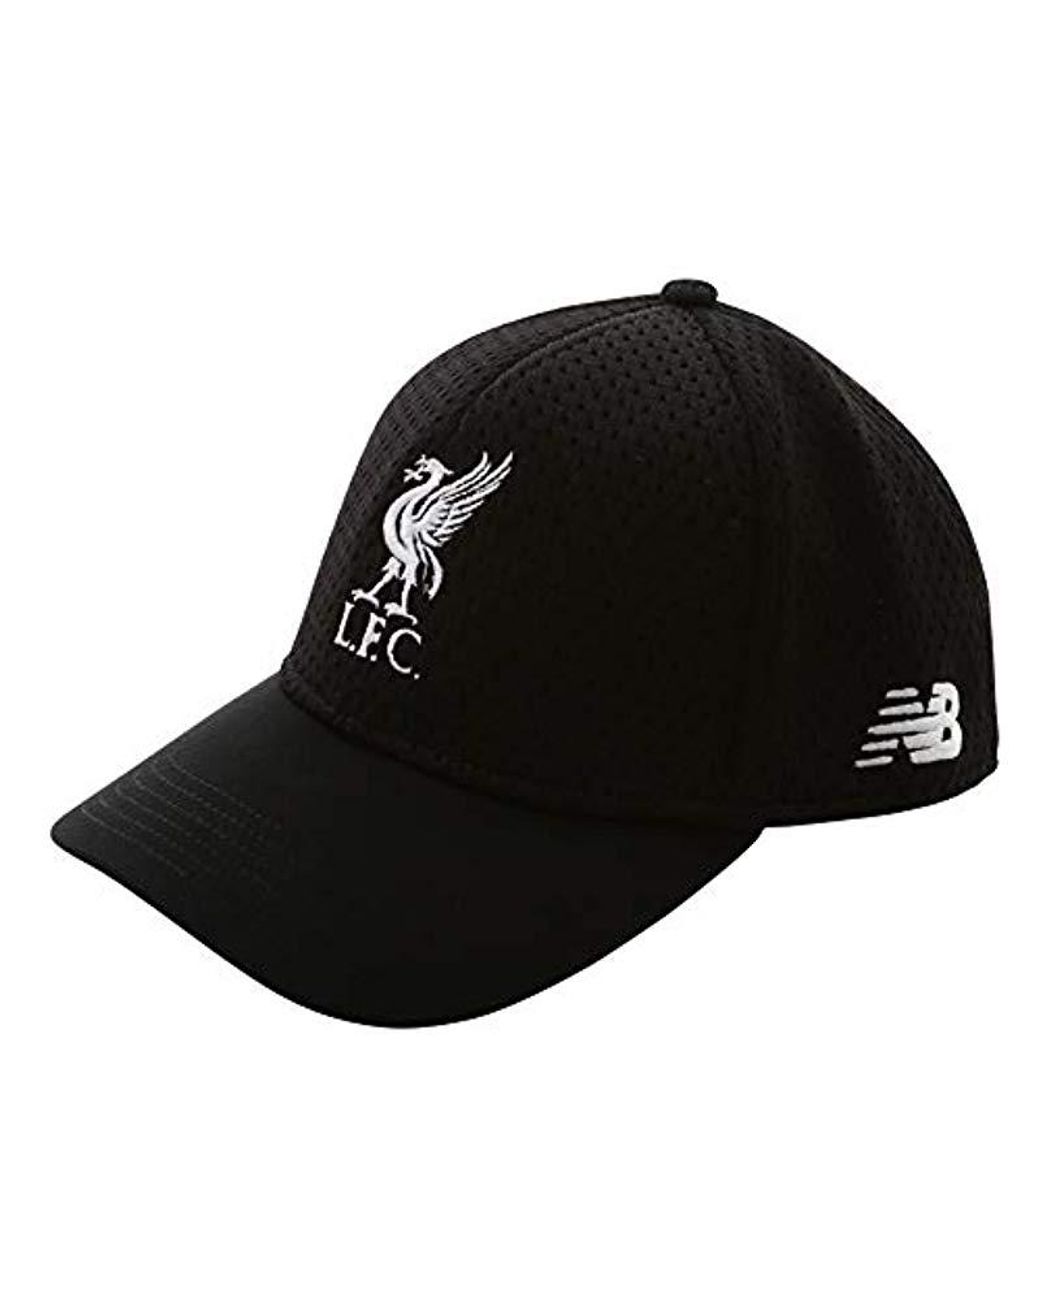 New Balance Liverpool Caps For Sale, 51% OFF | ignitionspeedfestival.com